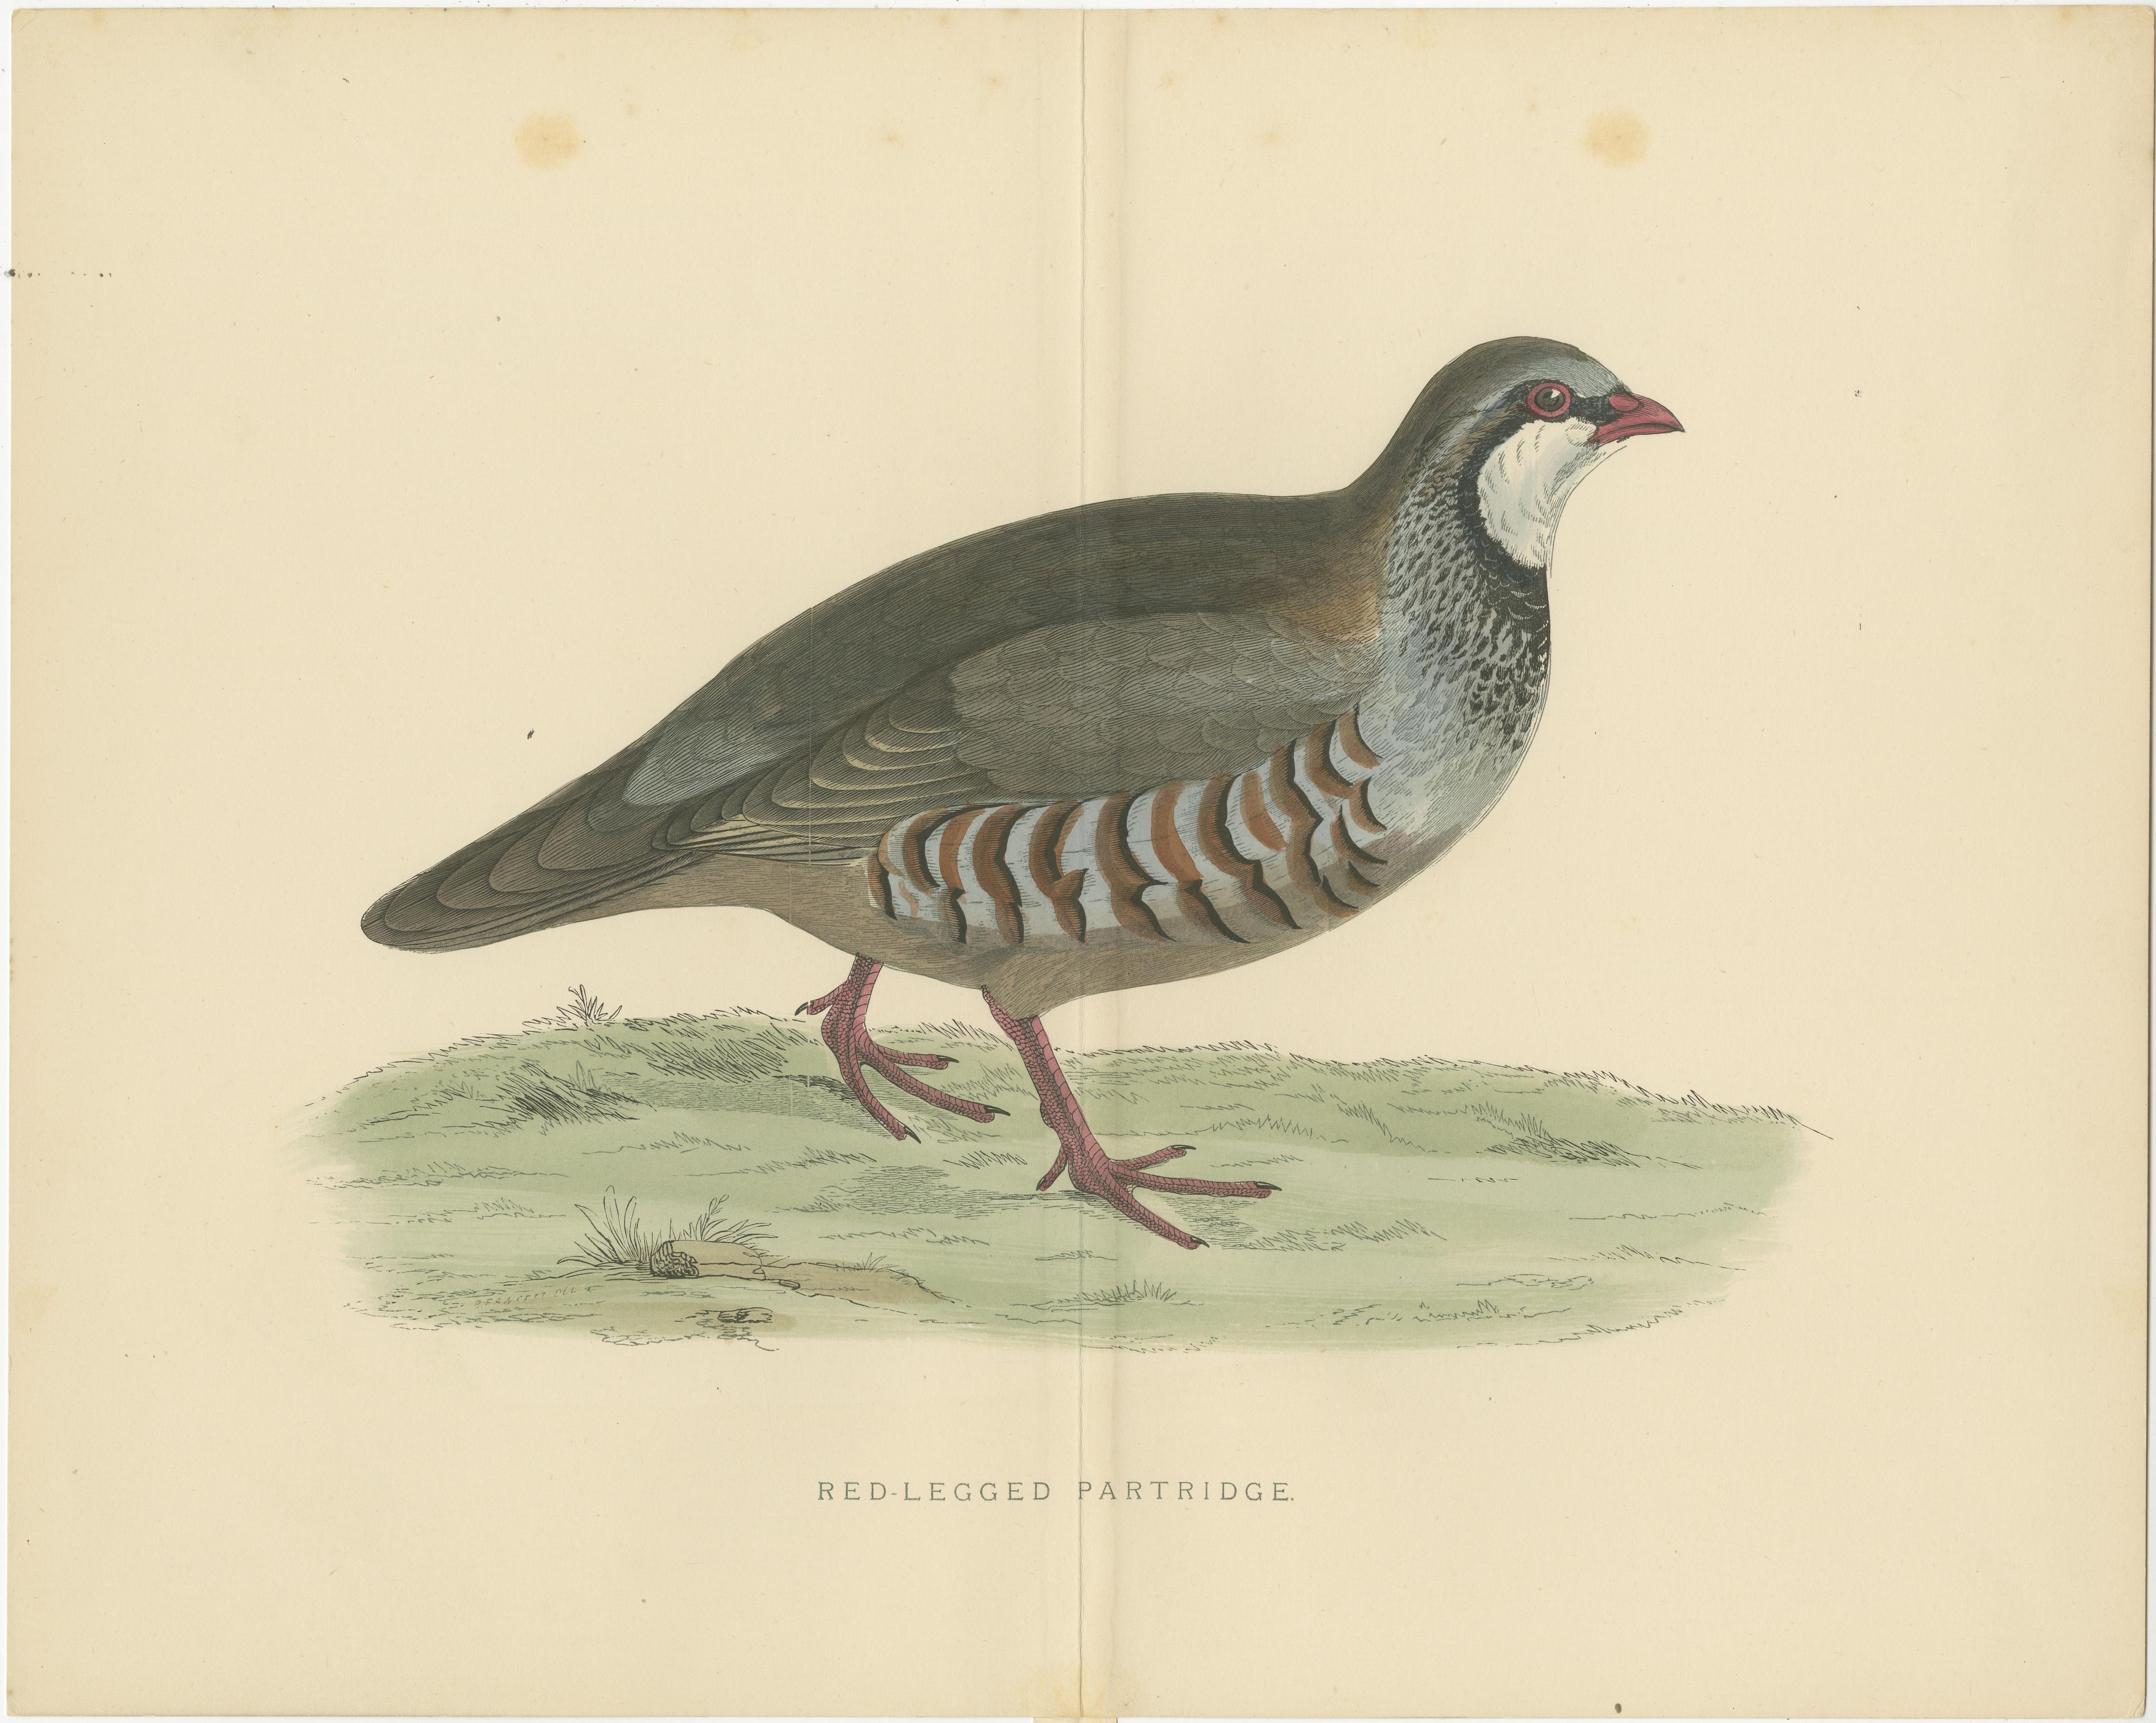 Antique print titled 'Red-Legged Partridge'. Original old bird print of a red-legged partridge. This print originates from 'British Game Birds and Wildfowl' by Beverly Robinson Morris. Published circa 1895.